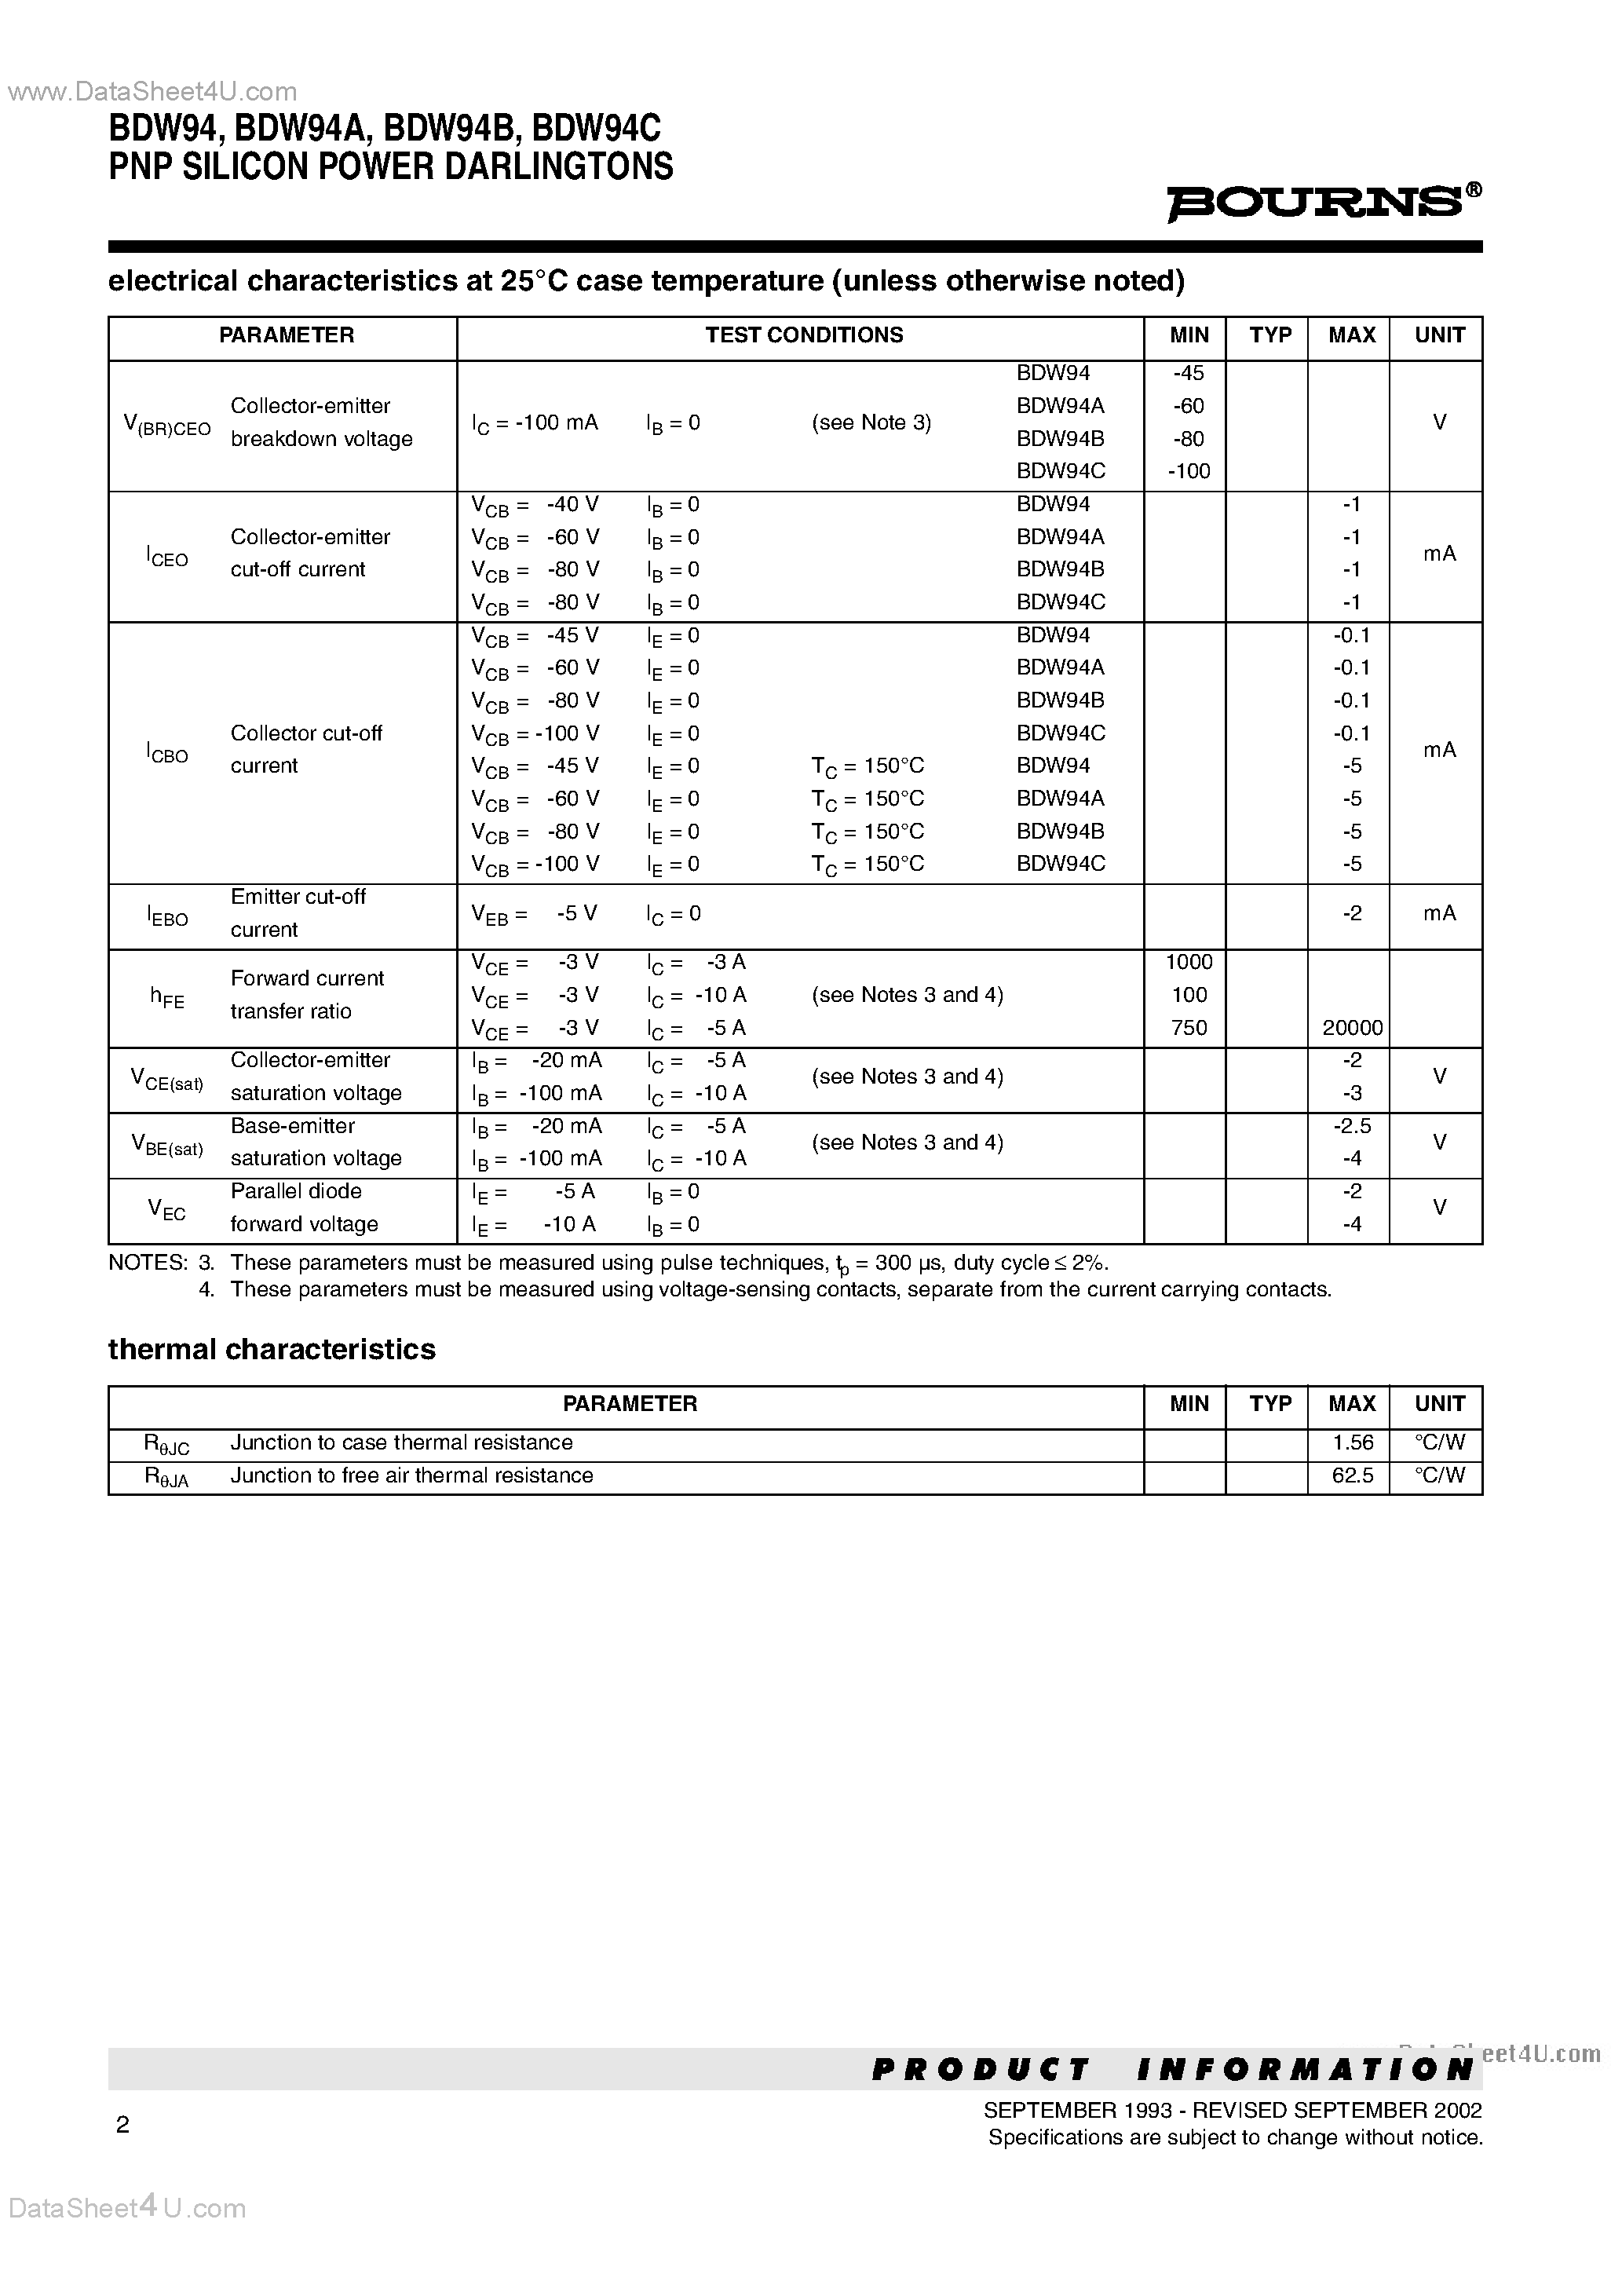 Datasheet BDW94 - PNP SILICON POWER DARLINGTONS page 2